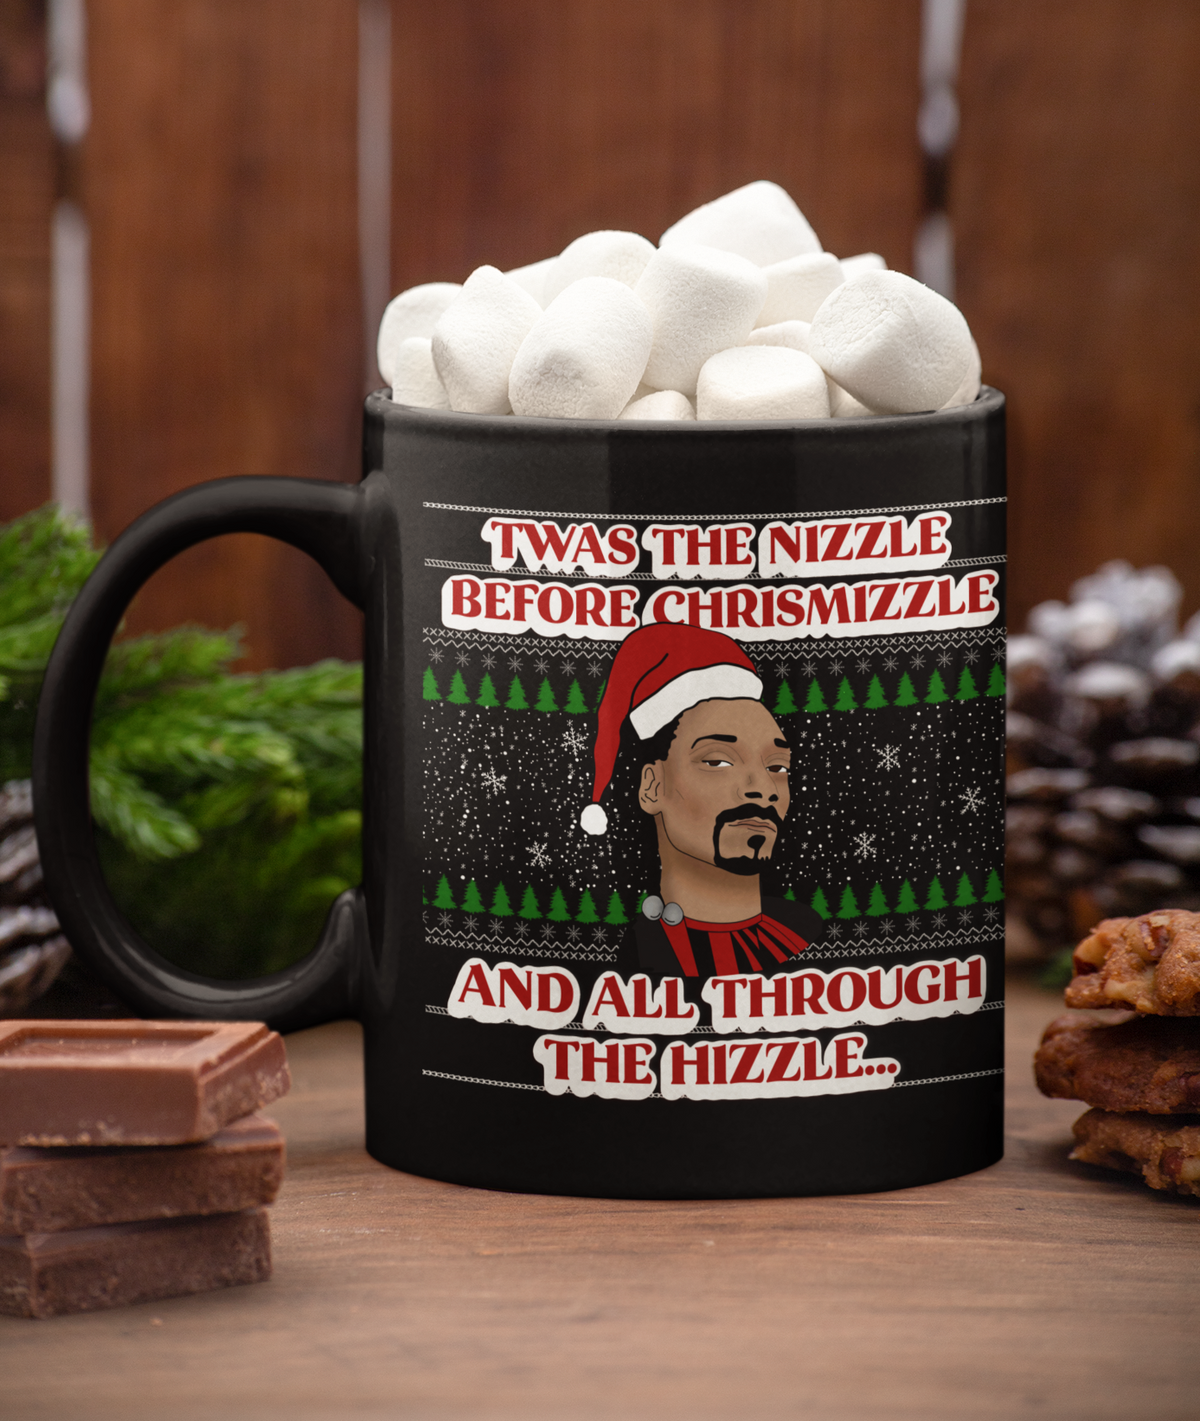 Black mug with snoop dogg saying Twas the nizzle before chrismizzle and all through the hizzle